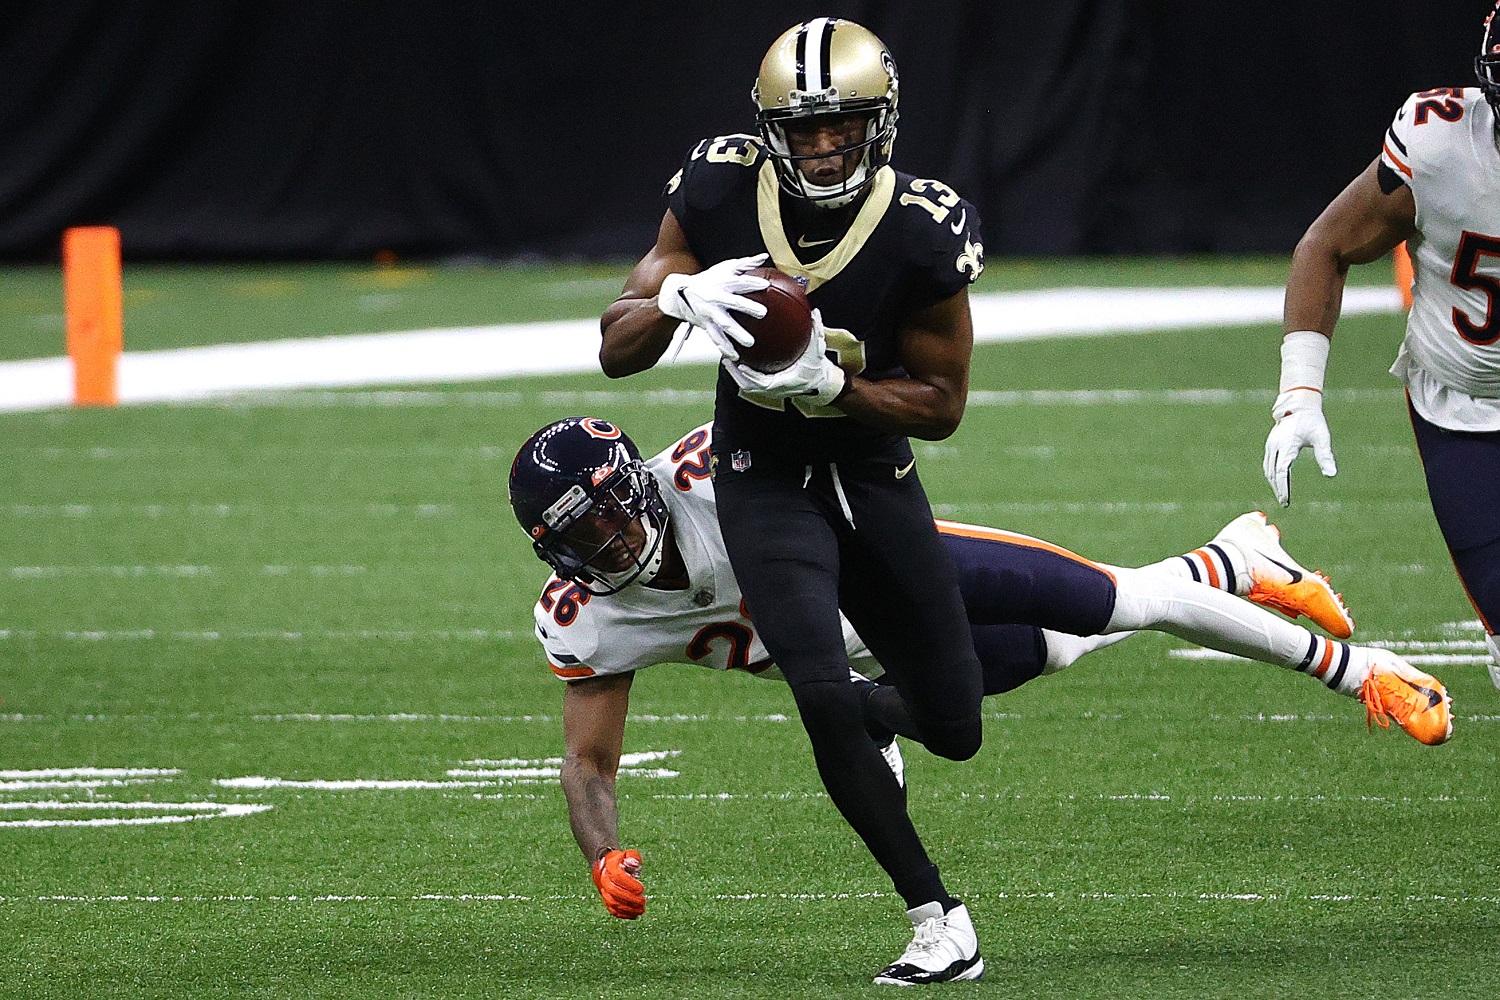 Michael Thomas of the New Orleans Saints runs through a tackle during the first quarter in the NFC playoffs against the Chicago Bears.